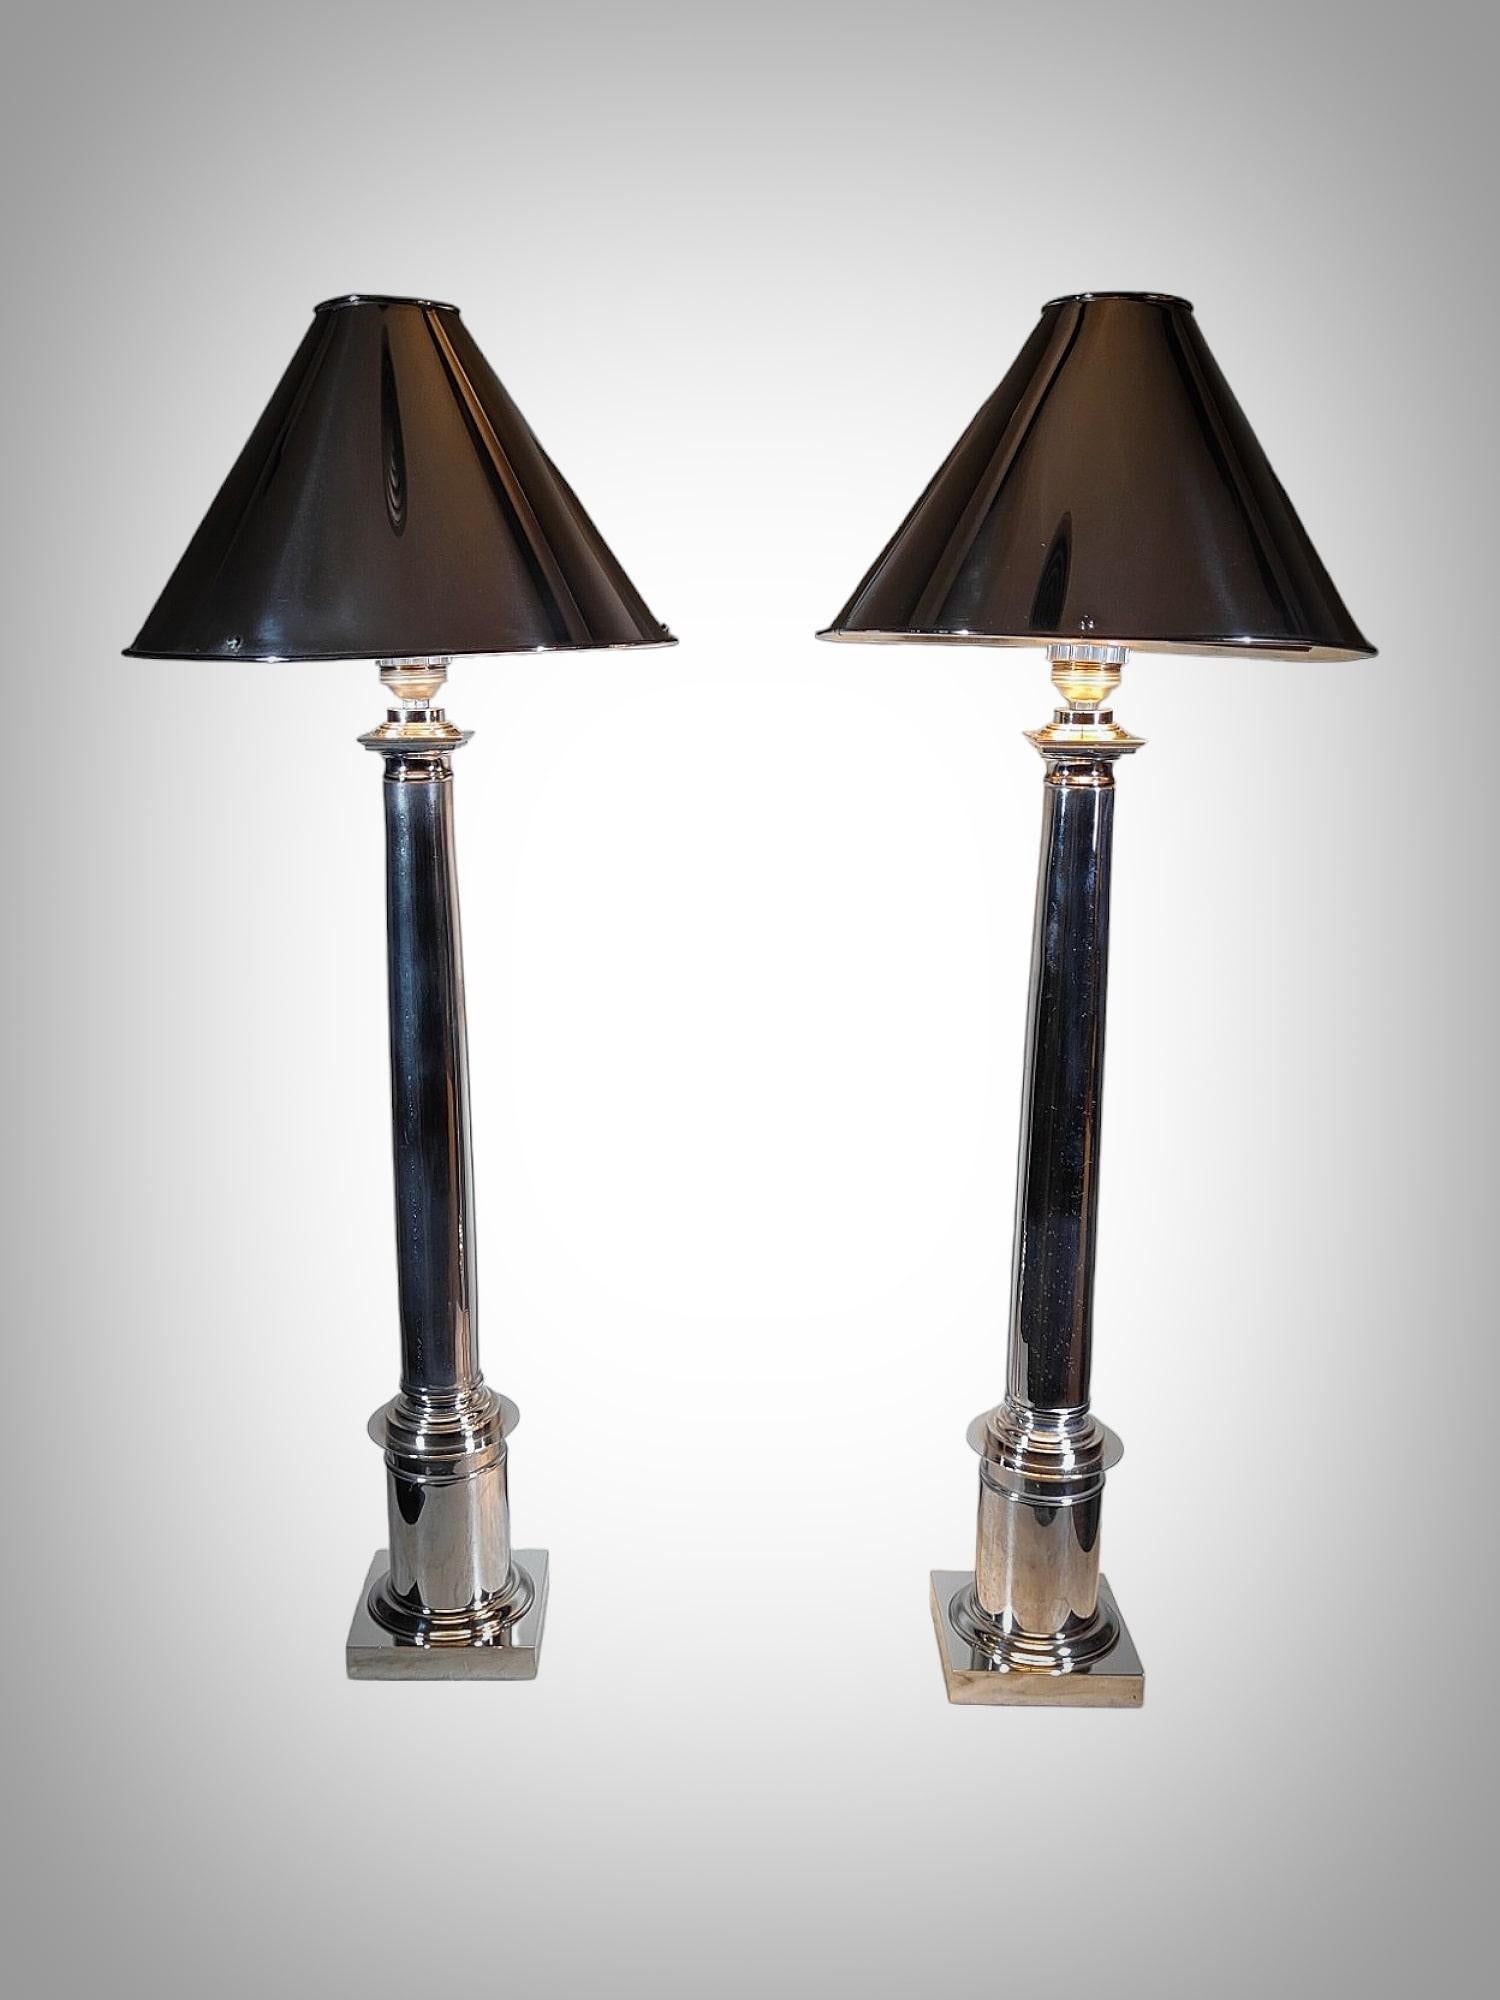 Introduce a touch of timeless sophistication with this magnificent pair of architectural design lamps crafted from solid nickel-plated bronze in the stylish spirit of 1970s Italy. A perfect blend of form and function, these lamps stand as a